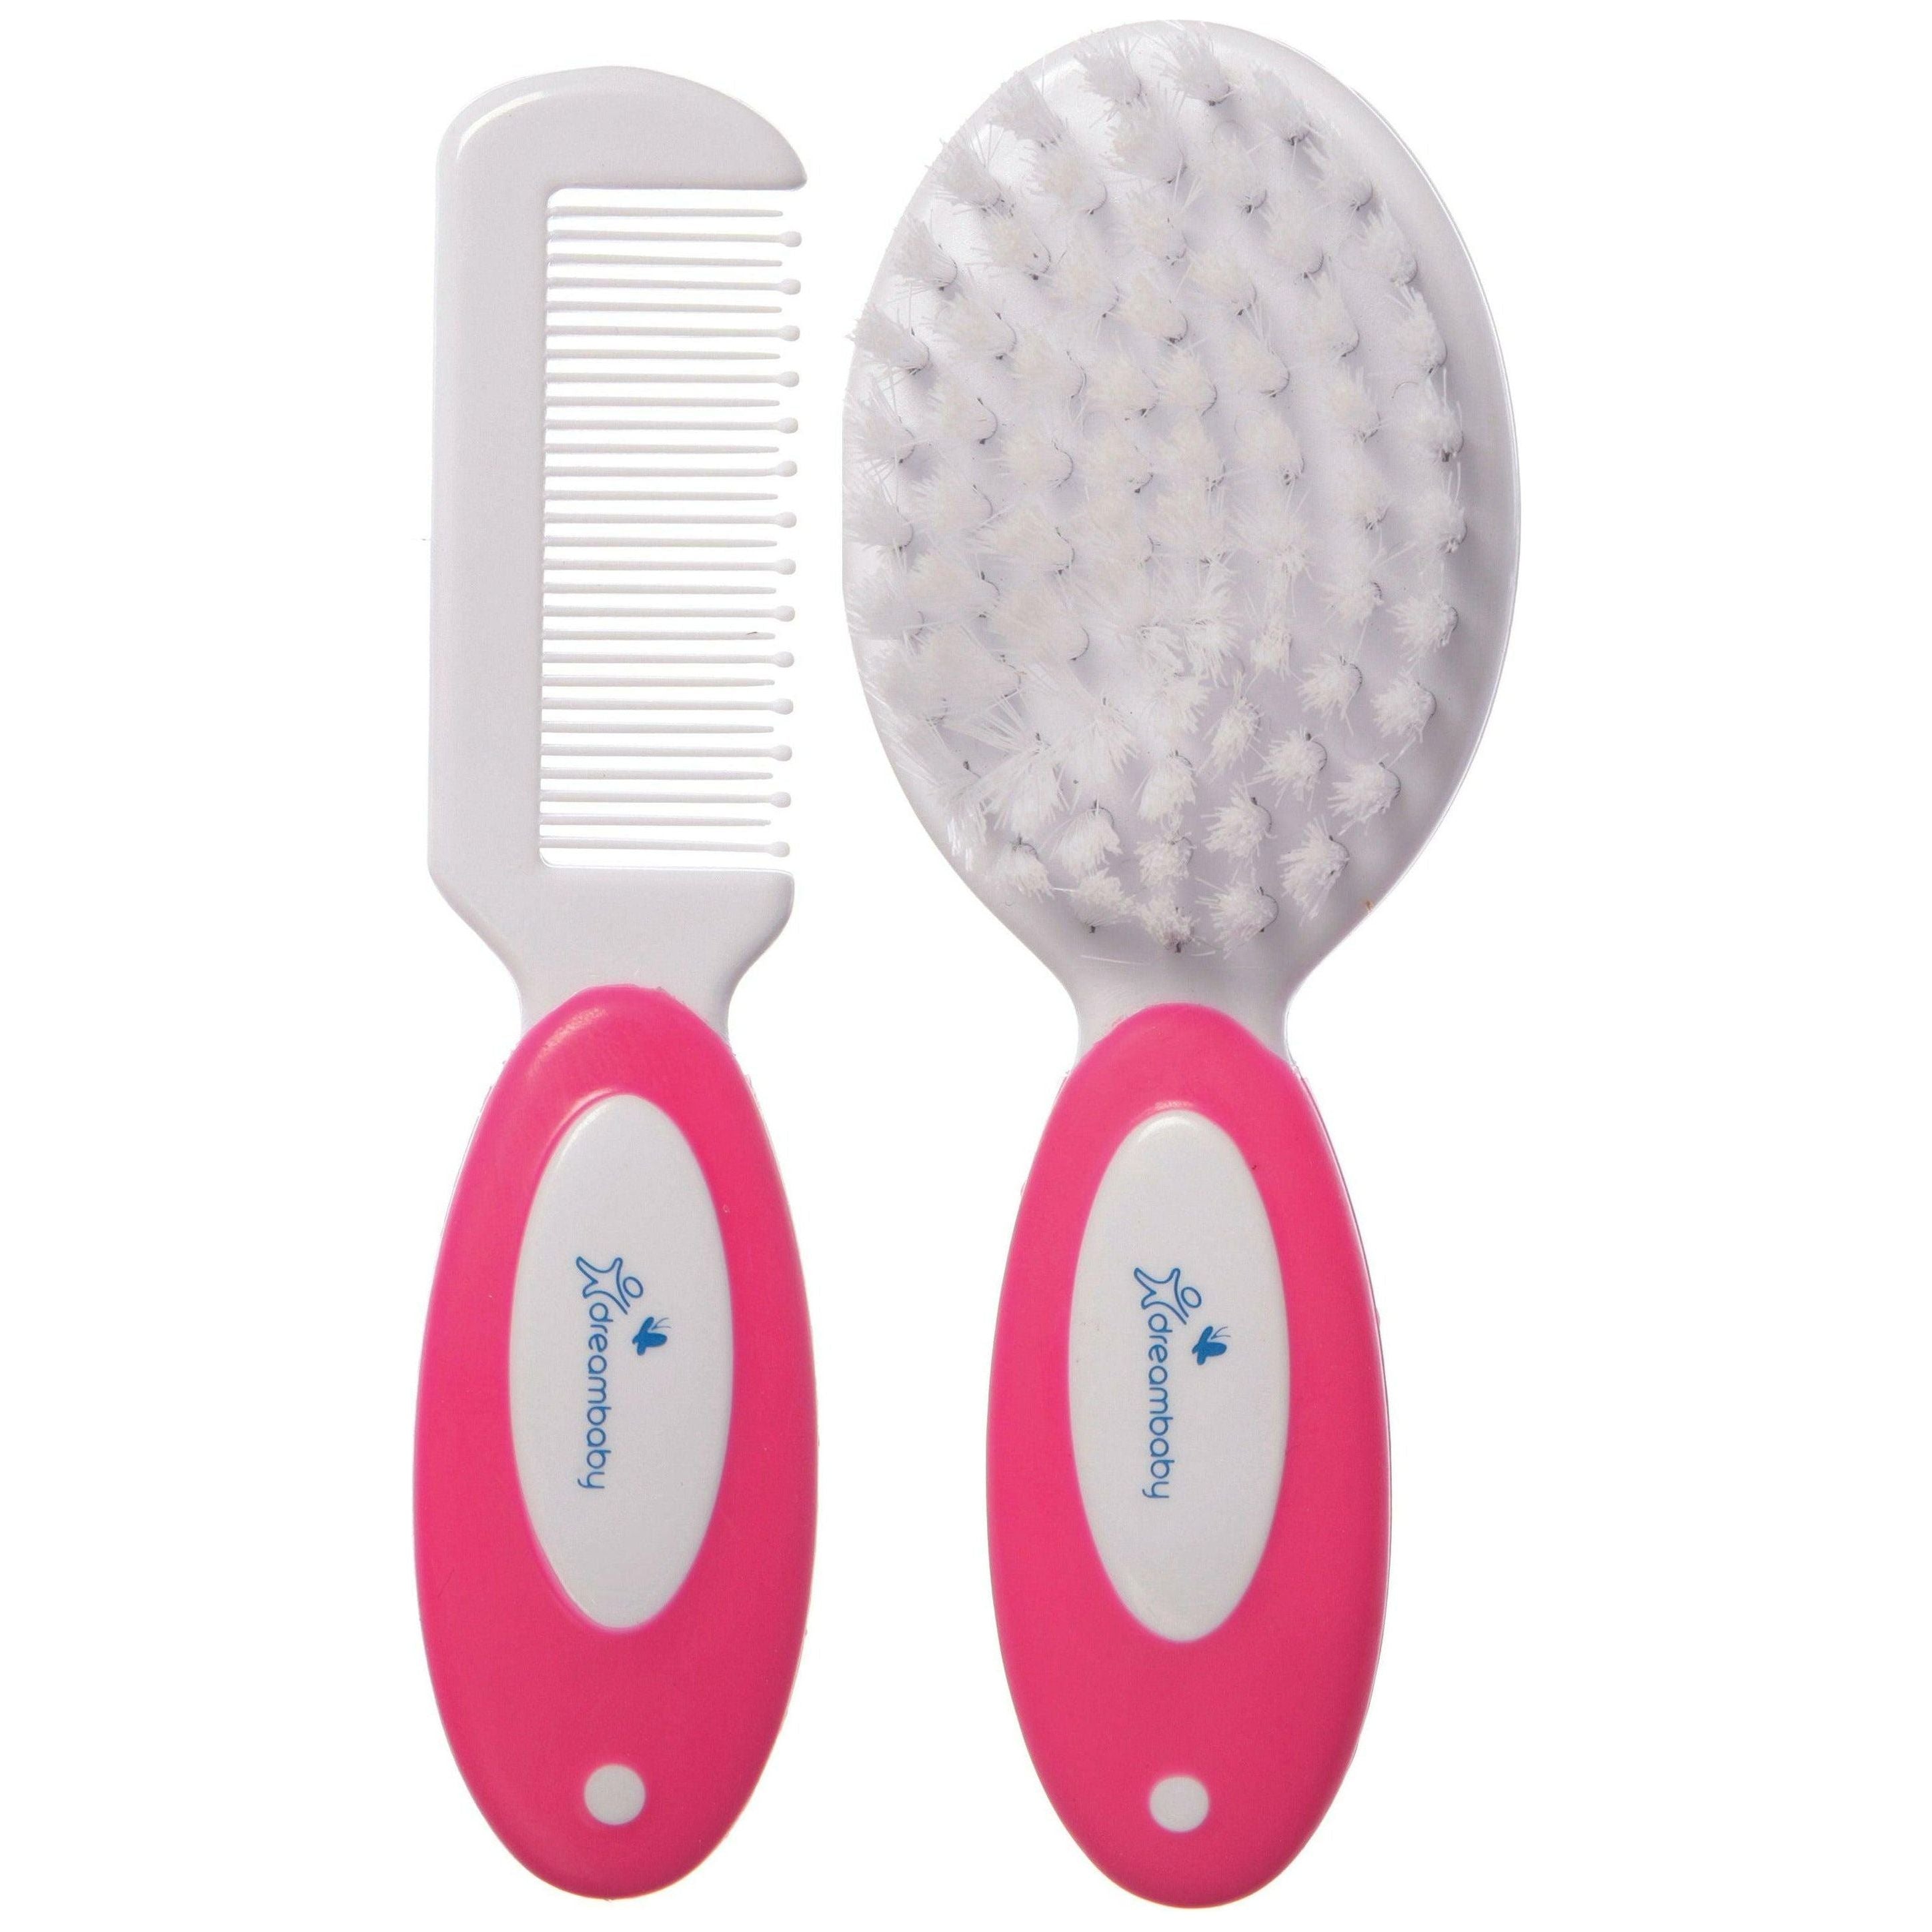 Dream baby G328 Deluxe Brush & Comb Set For Girls - BumbleToys - 0-24 Months, Babies, Baby Saftey & Health, Cecil, Girls